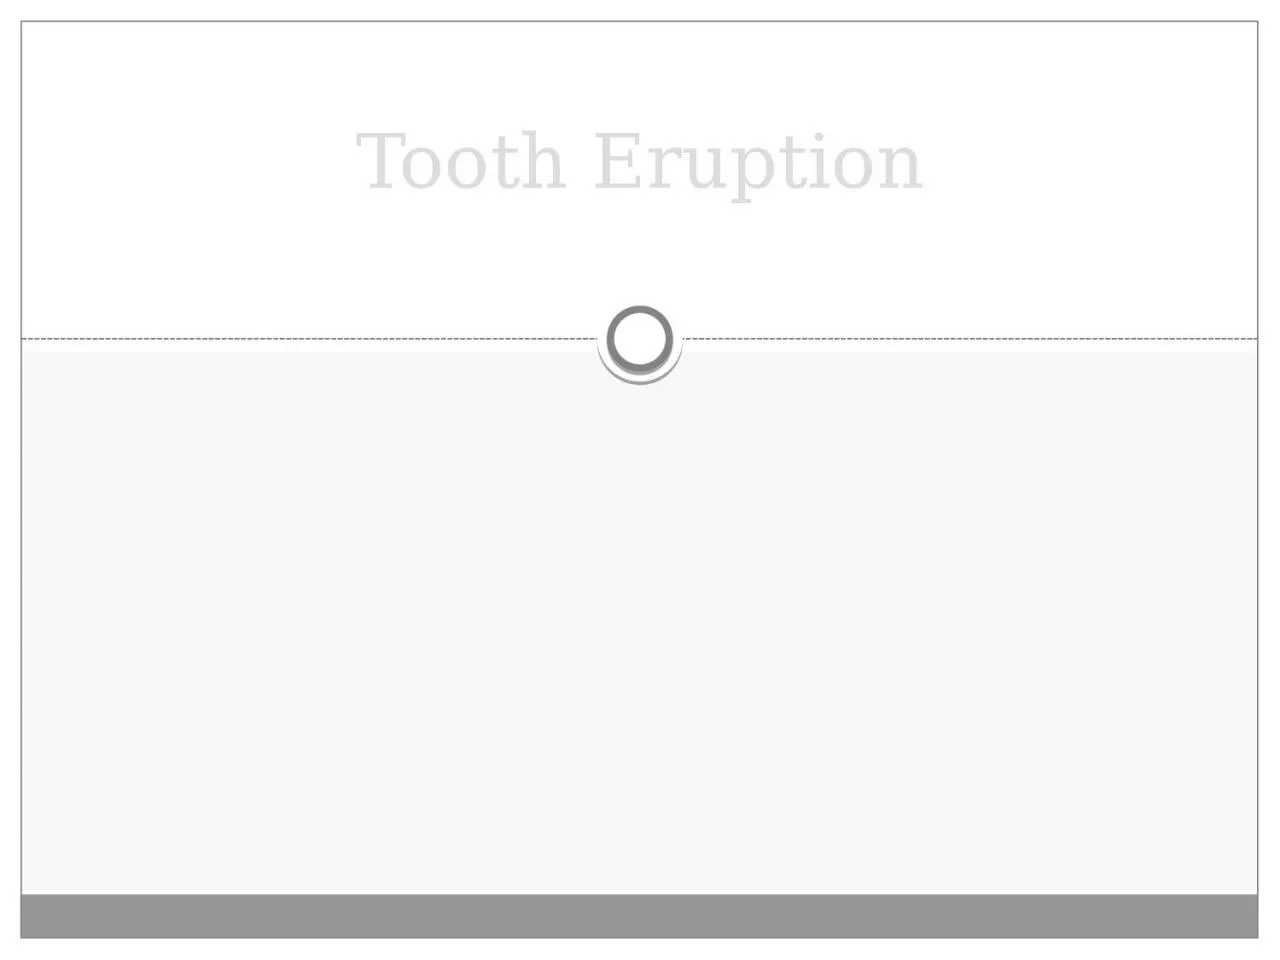 Tooth Eruption It is the axial or occlusal movement of the tooth from its developmental